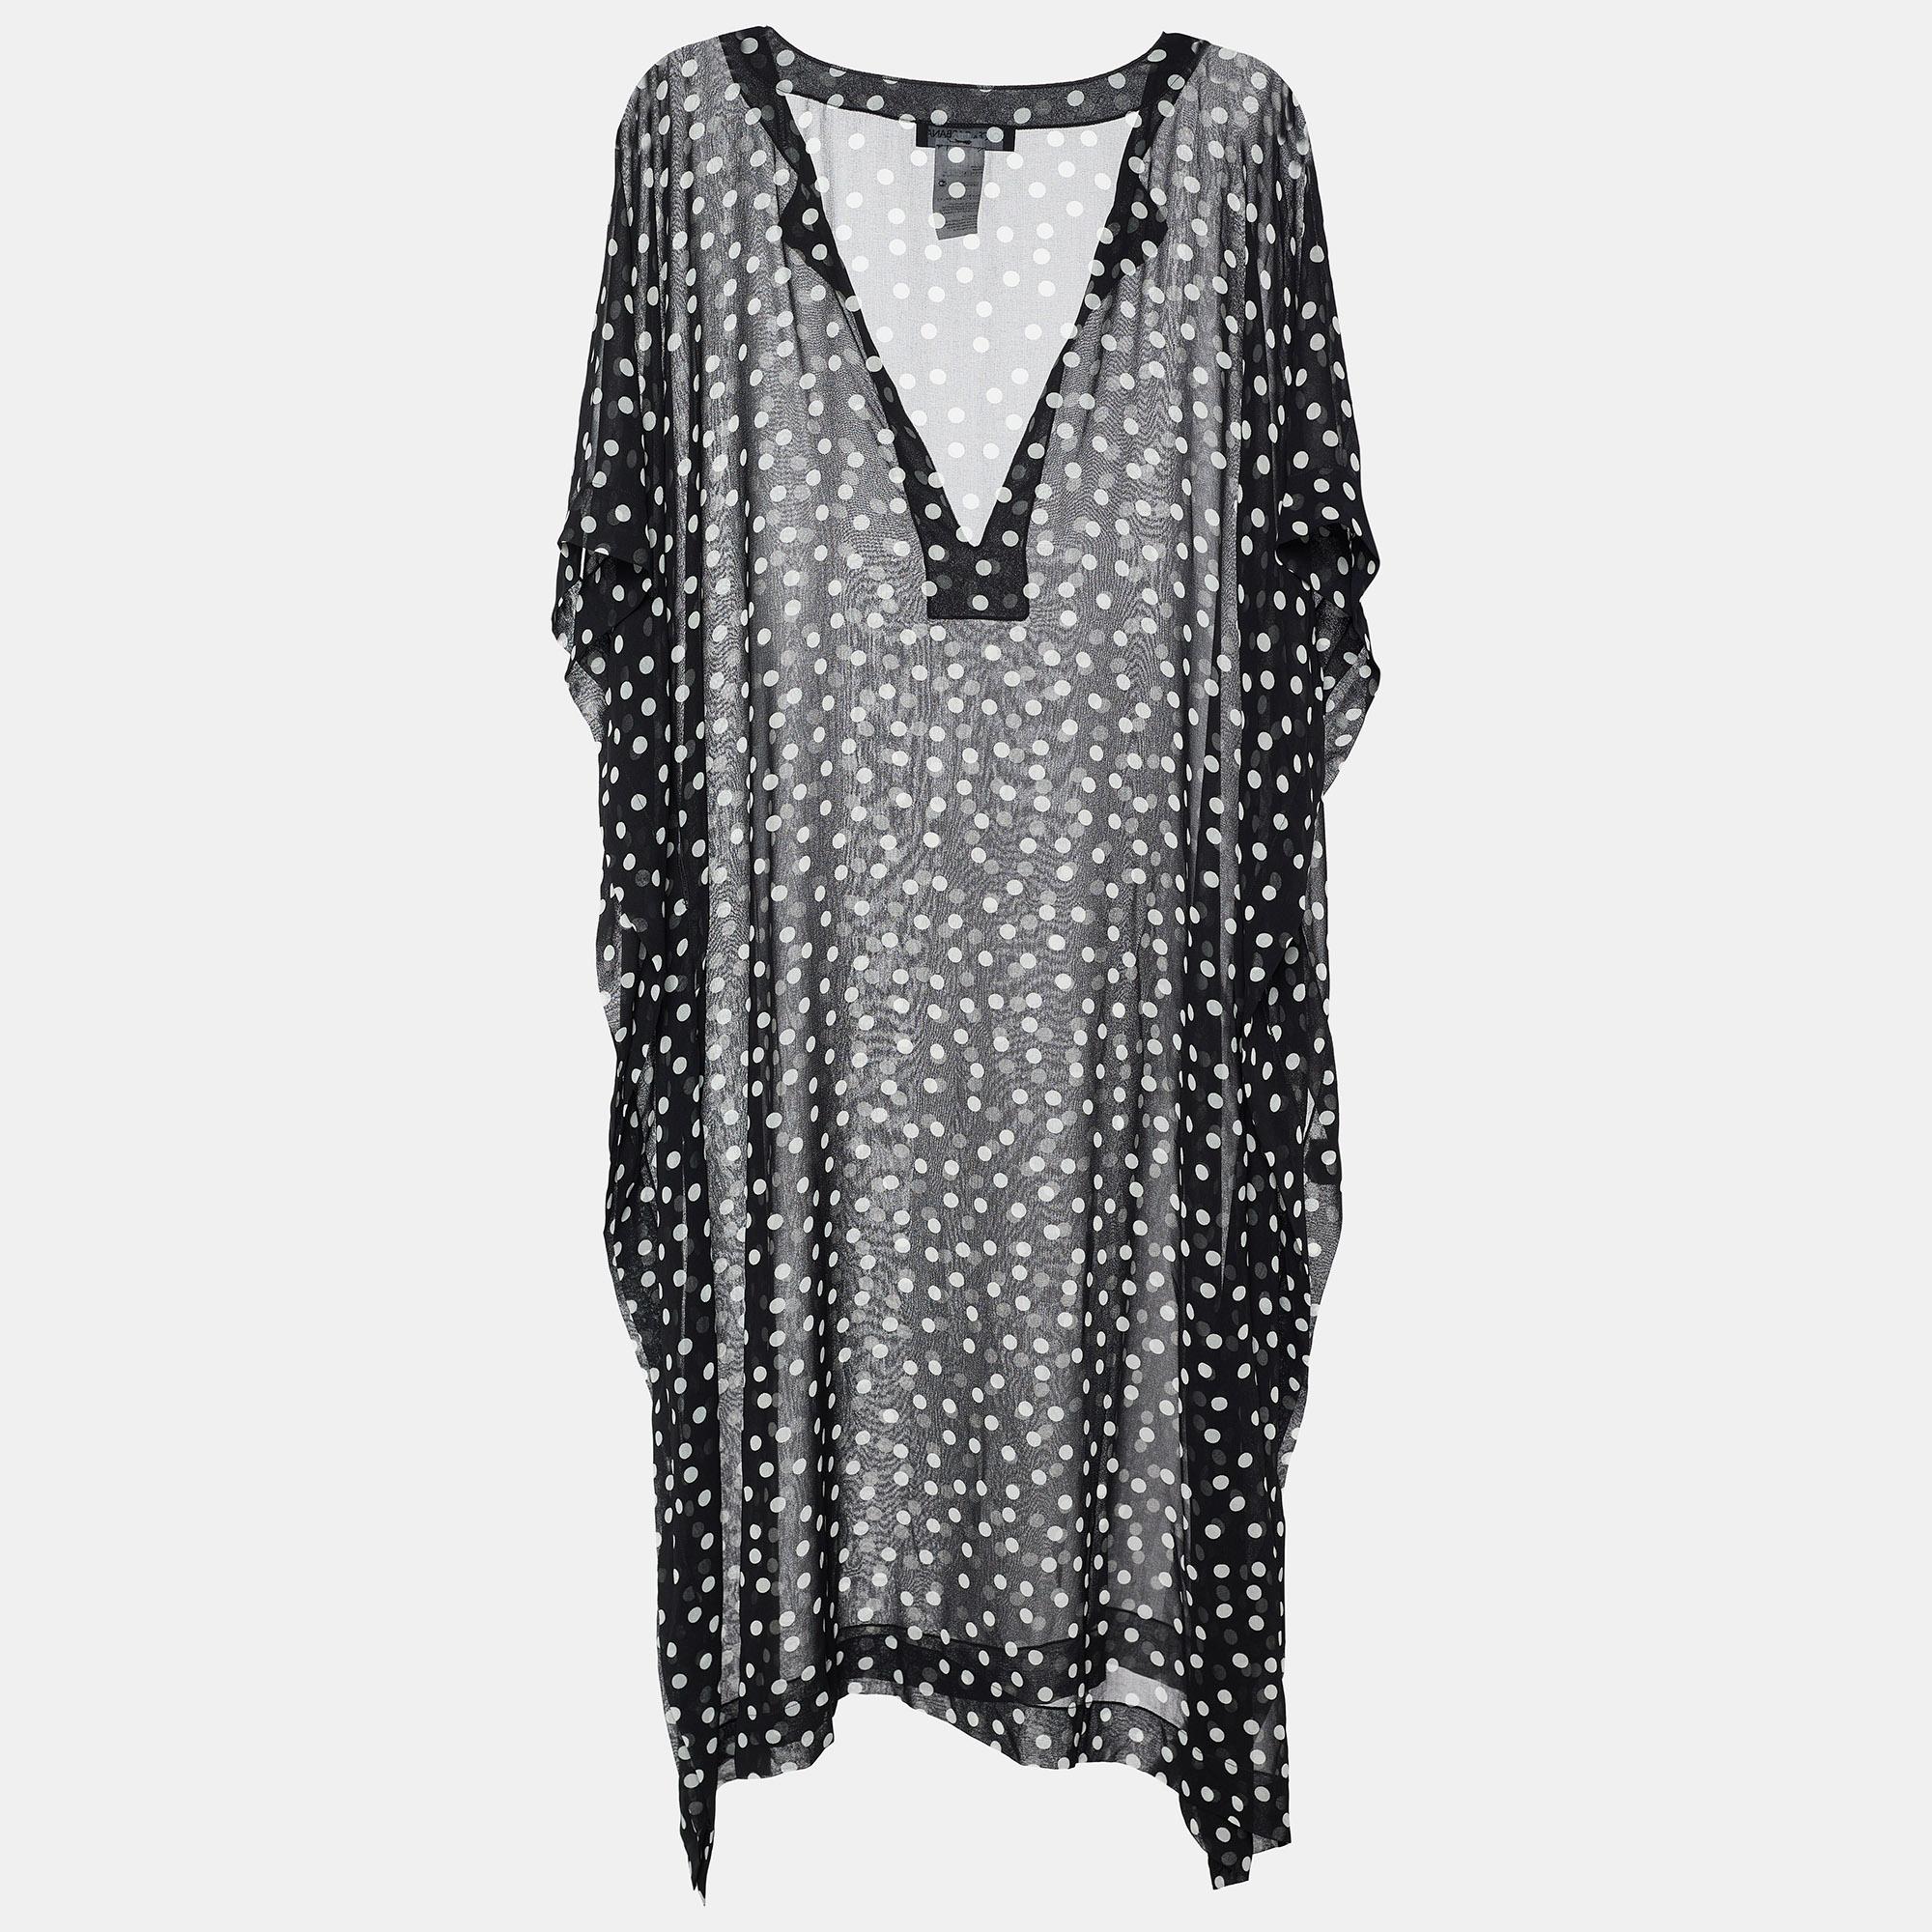 Feel comfortable, stylish, and relaxed in this top from the House of Dolce & Gabbana. Displaying an oversized-fit silhouette, this top is designed using white-black polka-dot printed georgette fabric. It has a V-shaped neckline. Style this top with